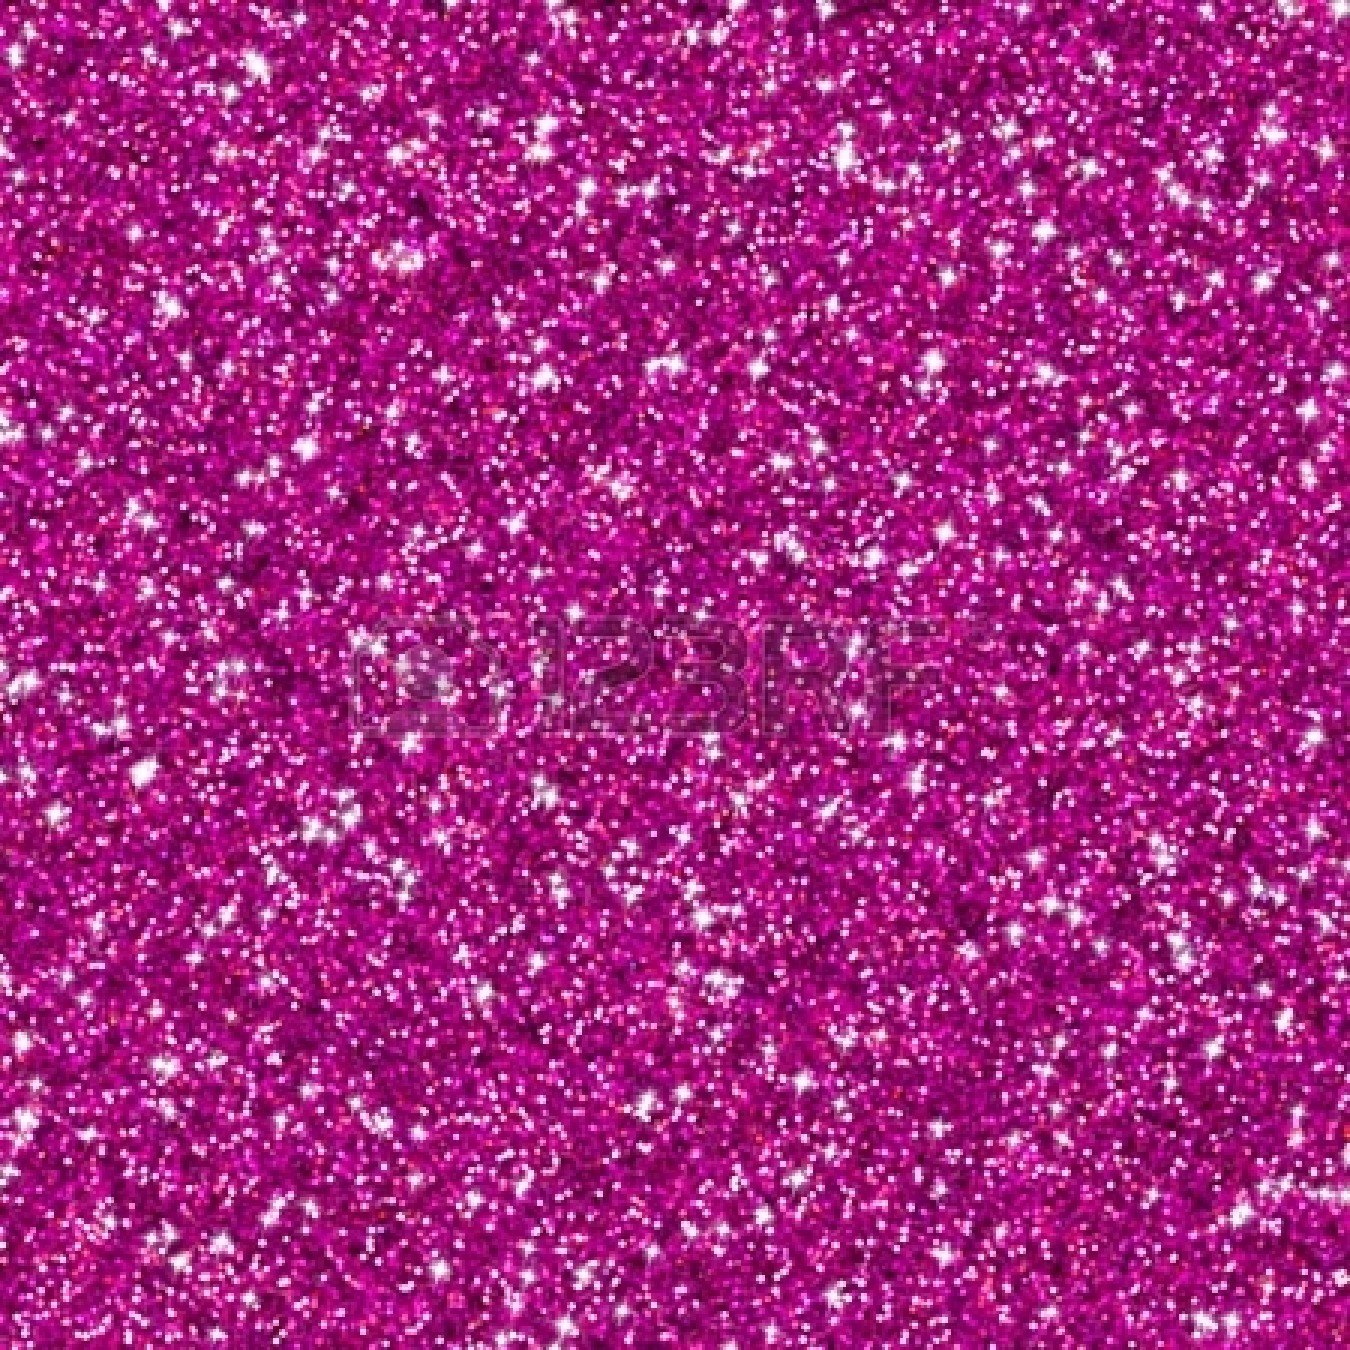 Pink Glitter Background Images